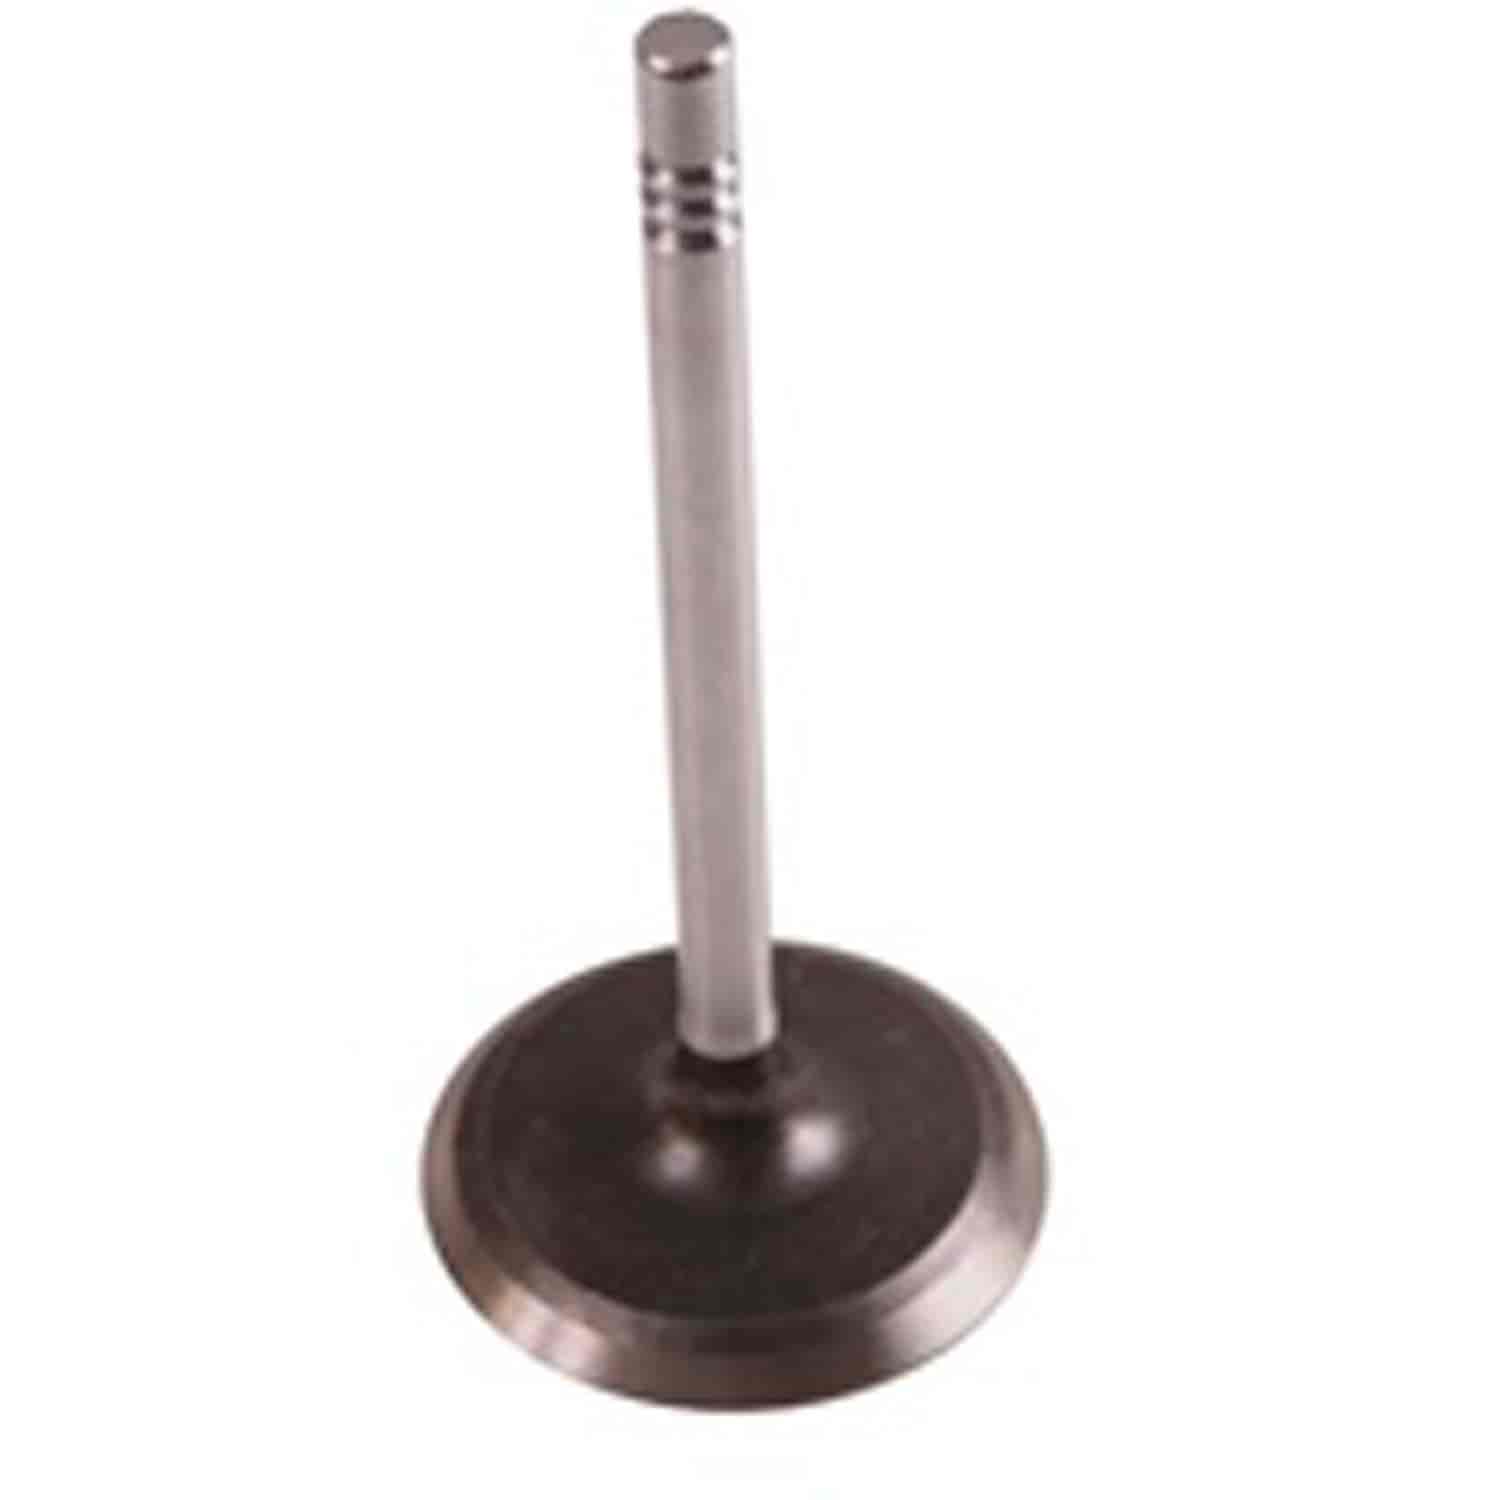 Intake Valve 3.8L 4.2L and 5.0L .003 inch Over 1972-1980 Models